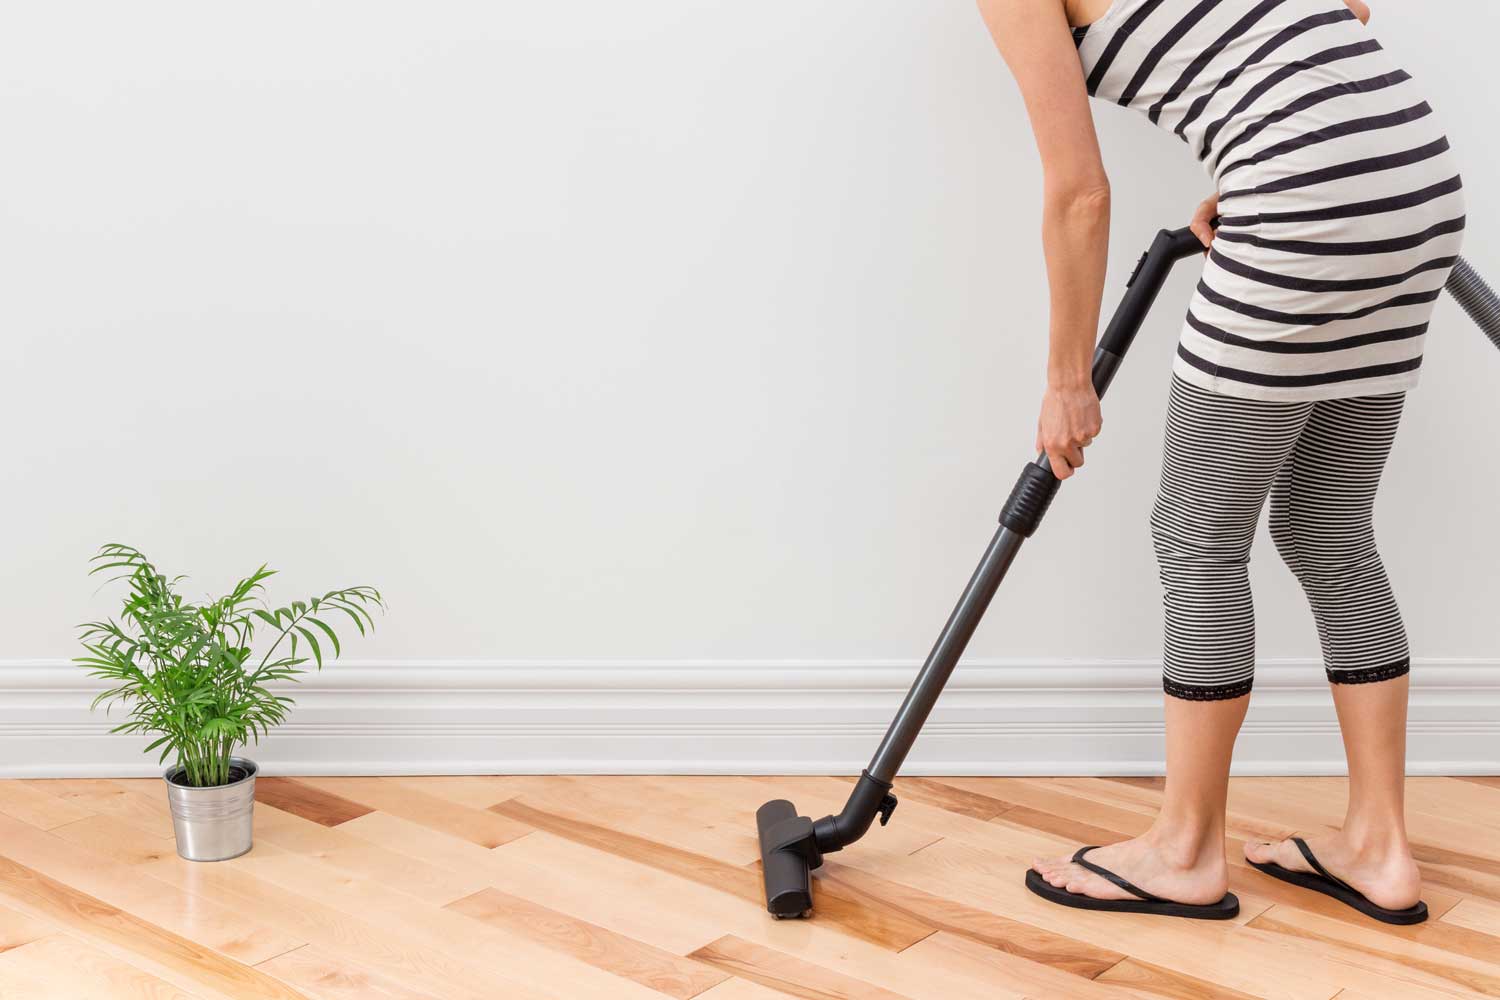 Regulary vacuum or sweep floors to remove dirt and keep your home floors looking amazing - tips from Footprints Floors in Miami / Broward.